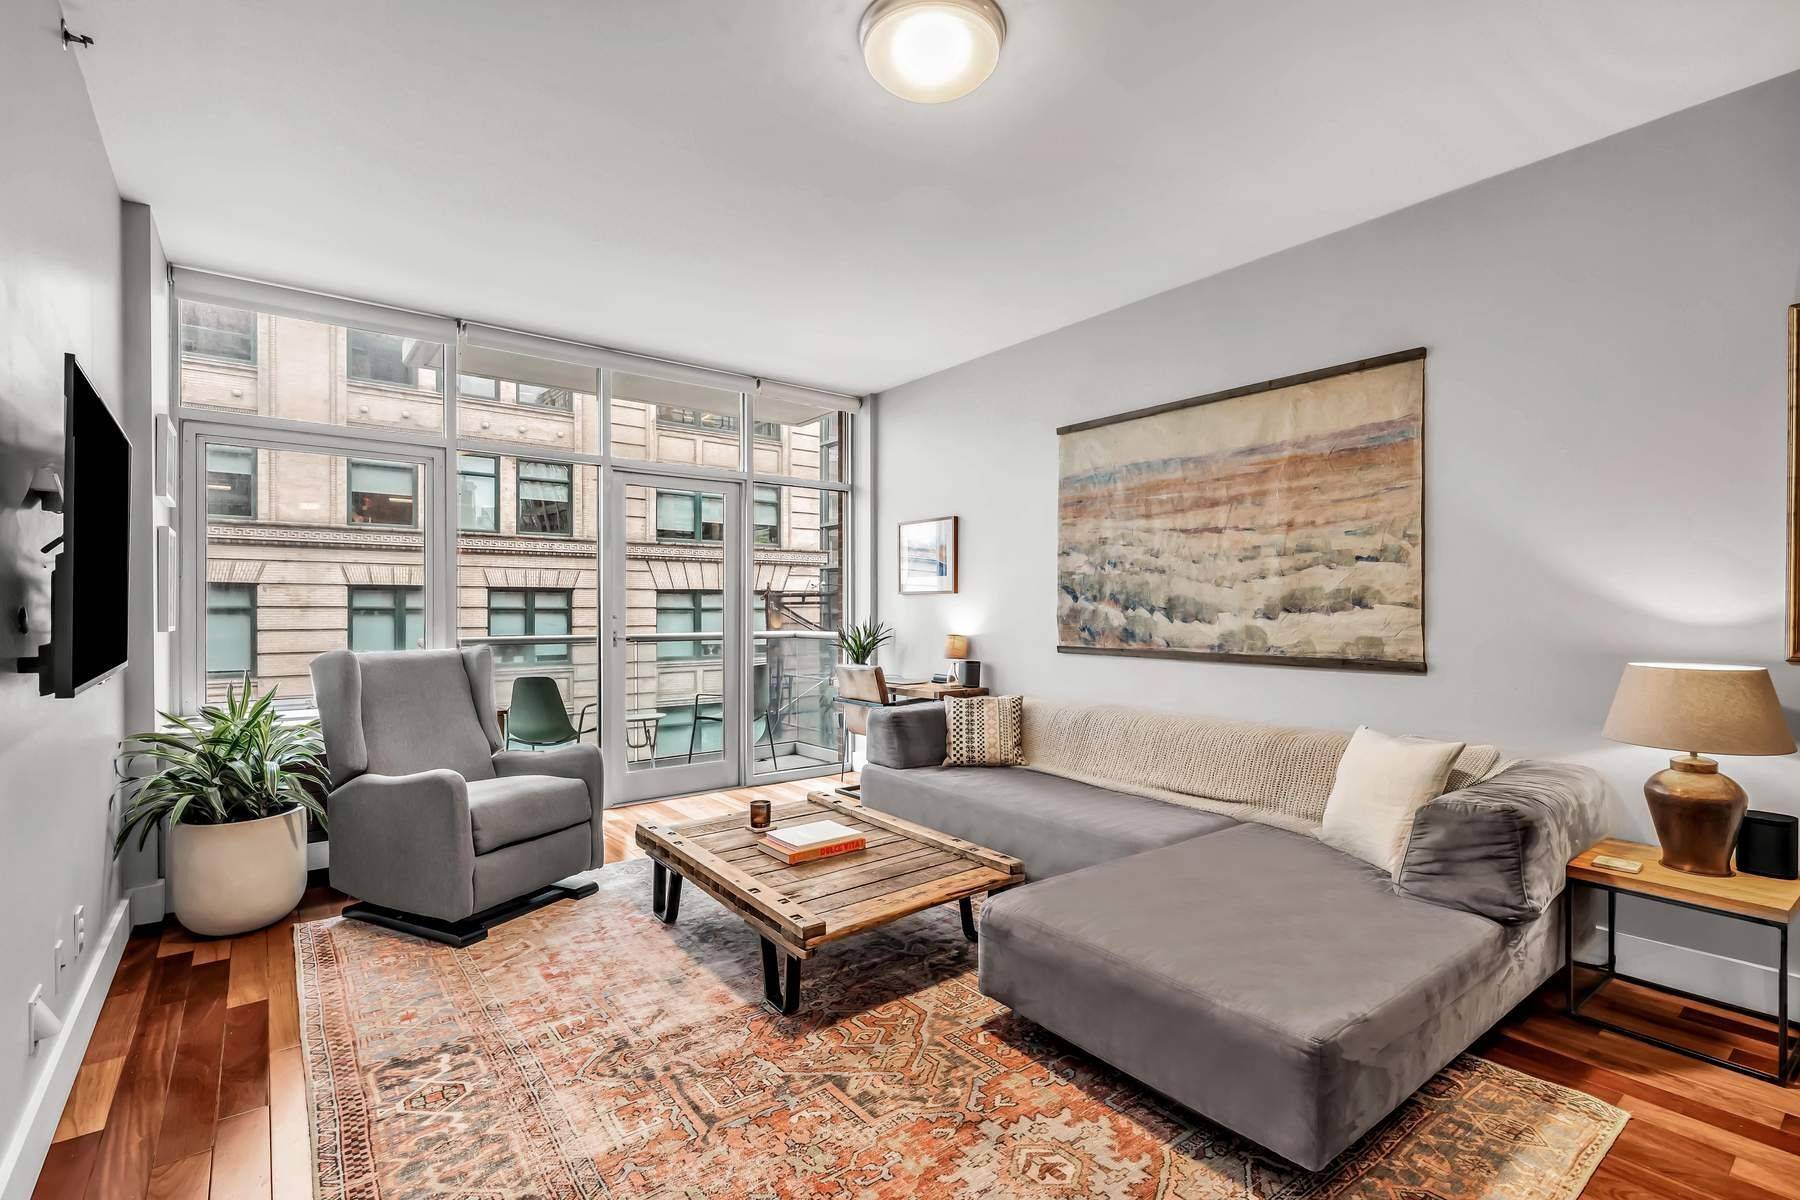 Modern, open and bright, 1 Bedroom with private Balcony off of the Living Room offering views of the water and overlooking picturesque Spring Street.